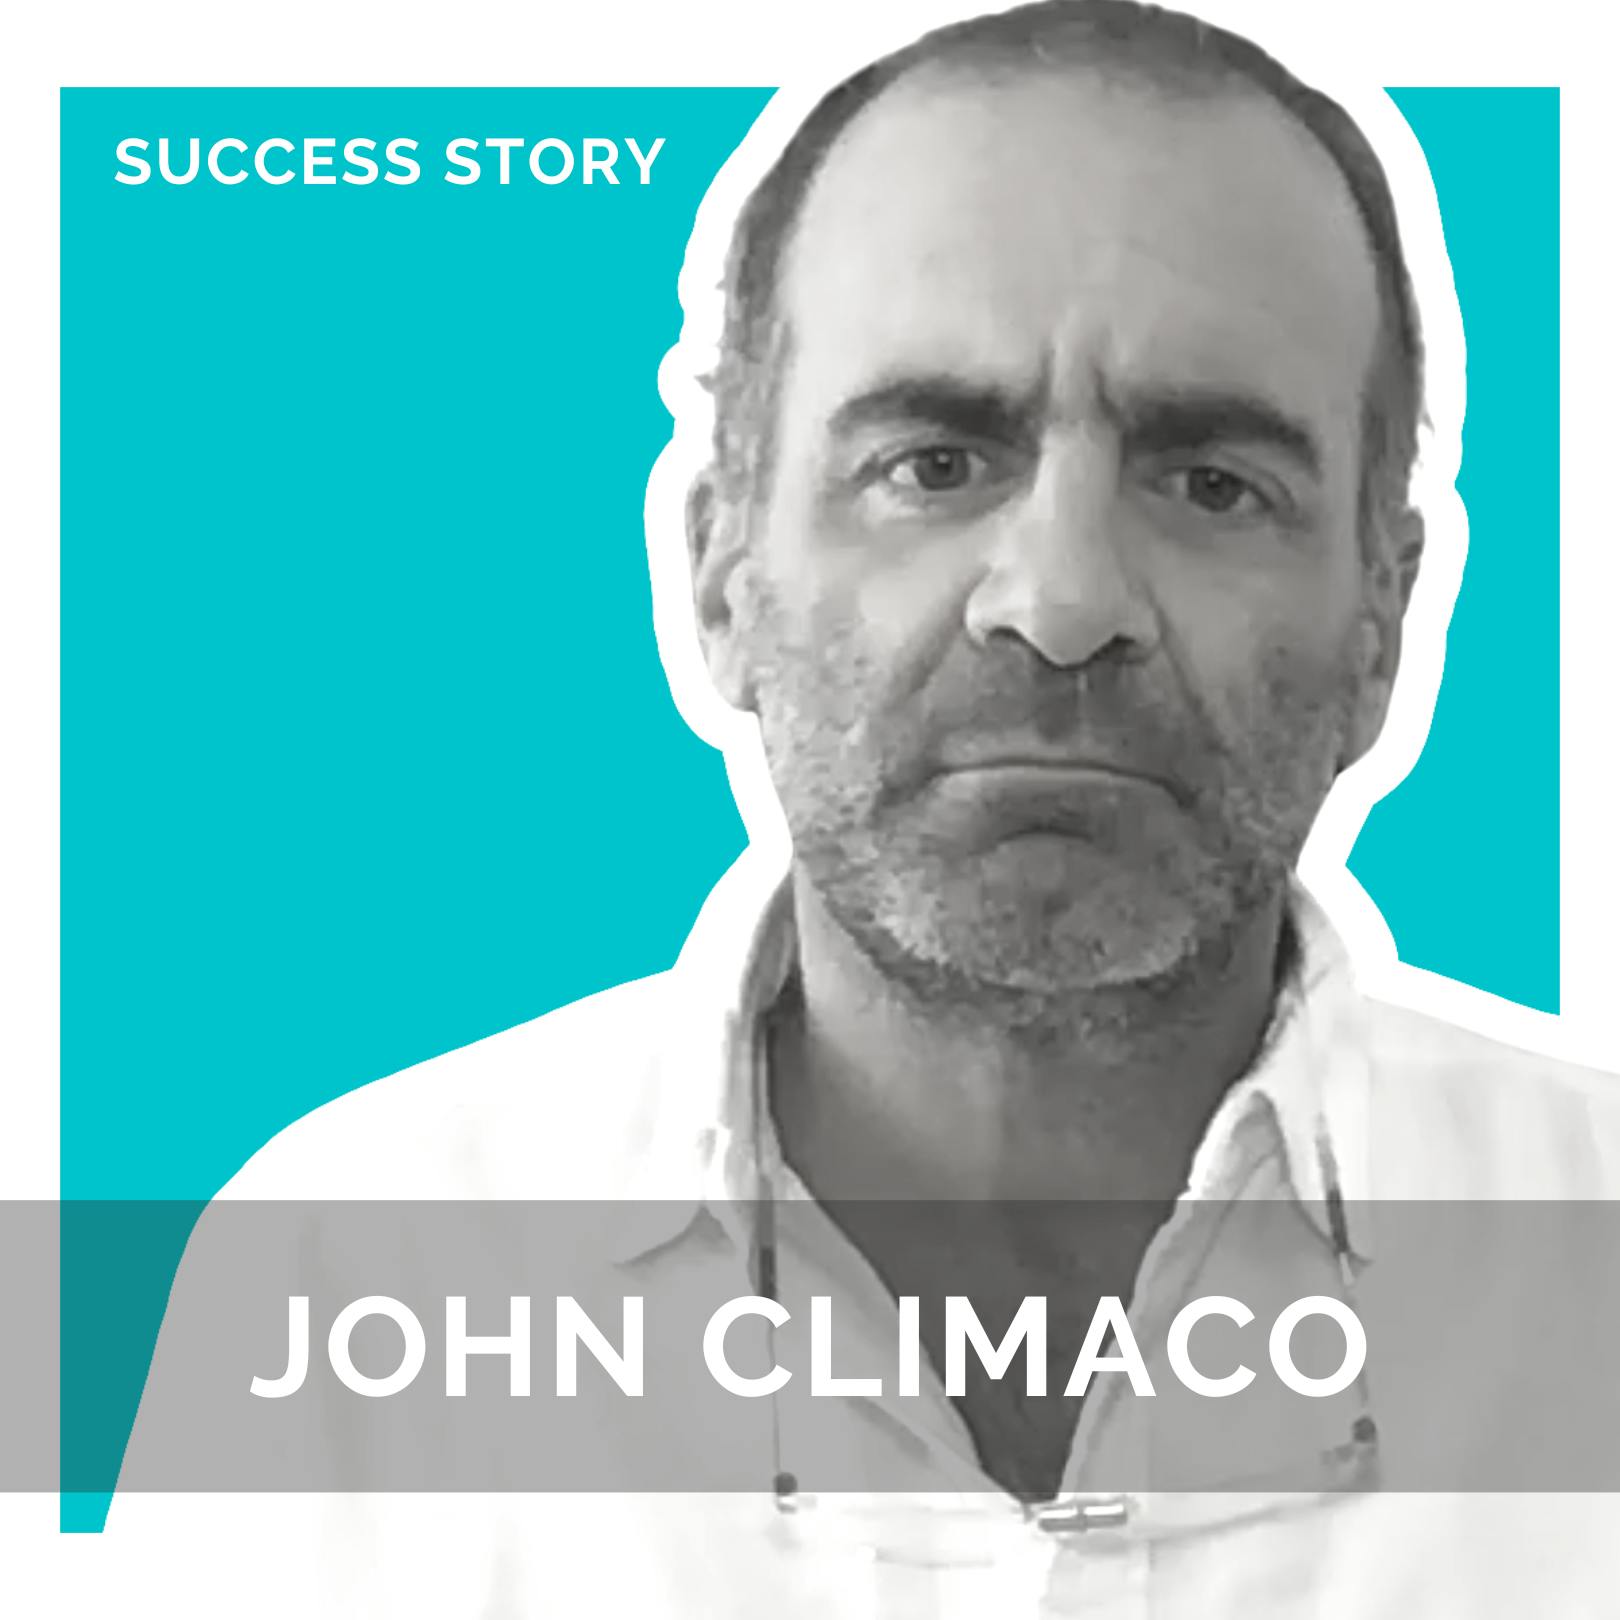 John Climaco - Chairman & CEO of CNS Pharmaceuticals | Curing Brain Cancer